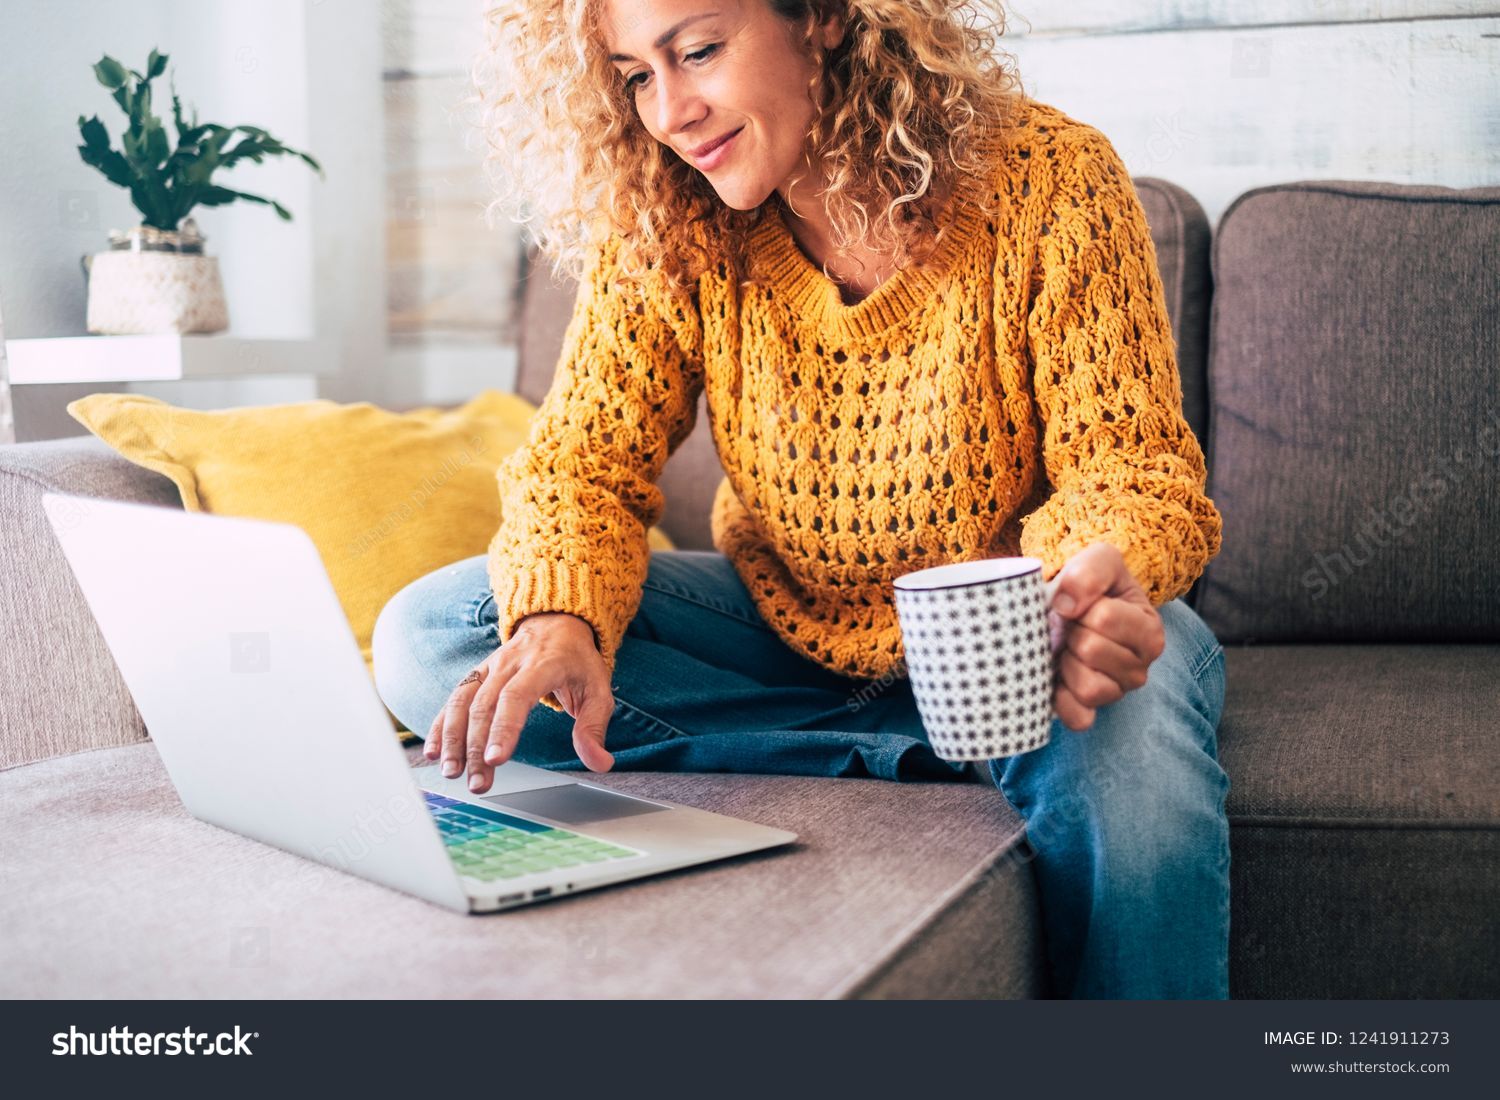 Nice beautiful lady with blonde curly hair work at the notebook sit down on the sofa at home - check on oline shops for cyber monday sales - technology woman concept for alternative office freelance #1241911273